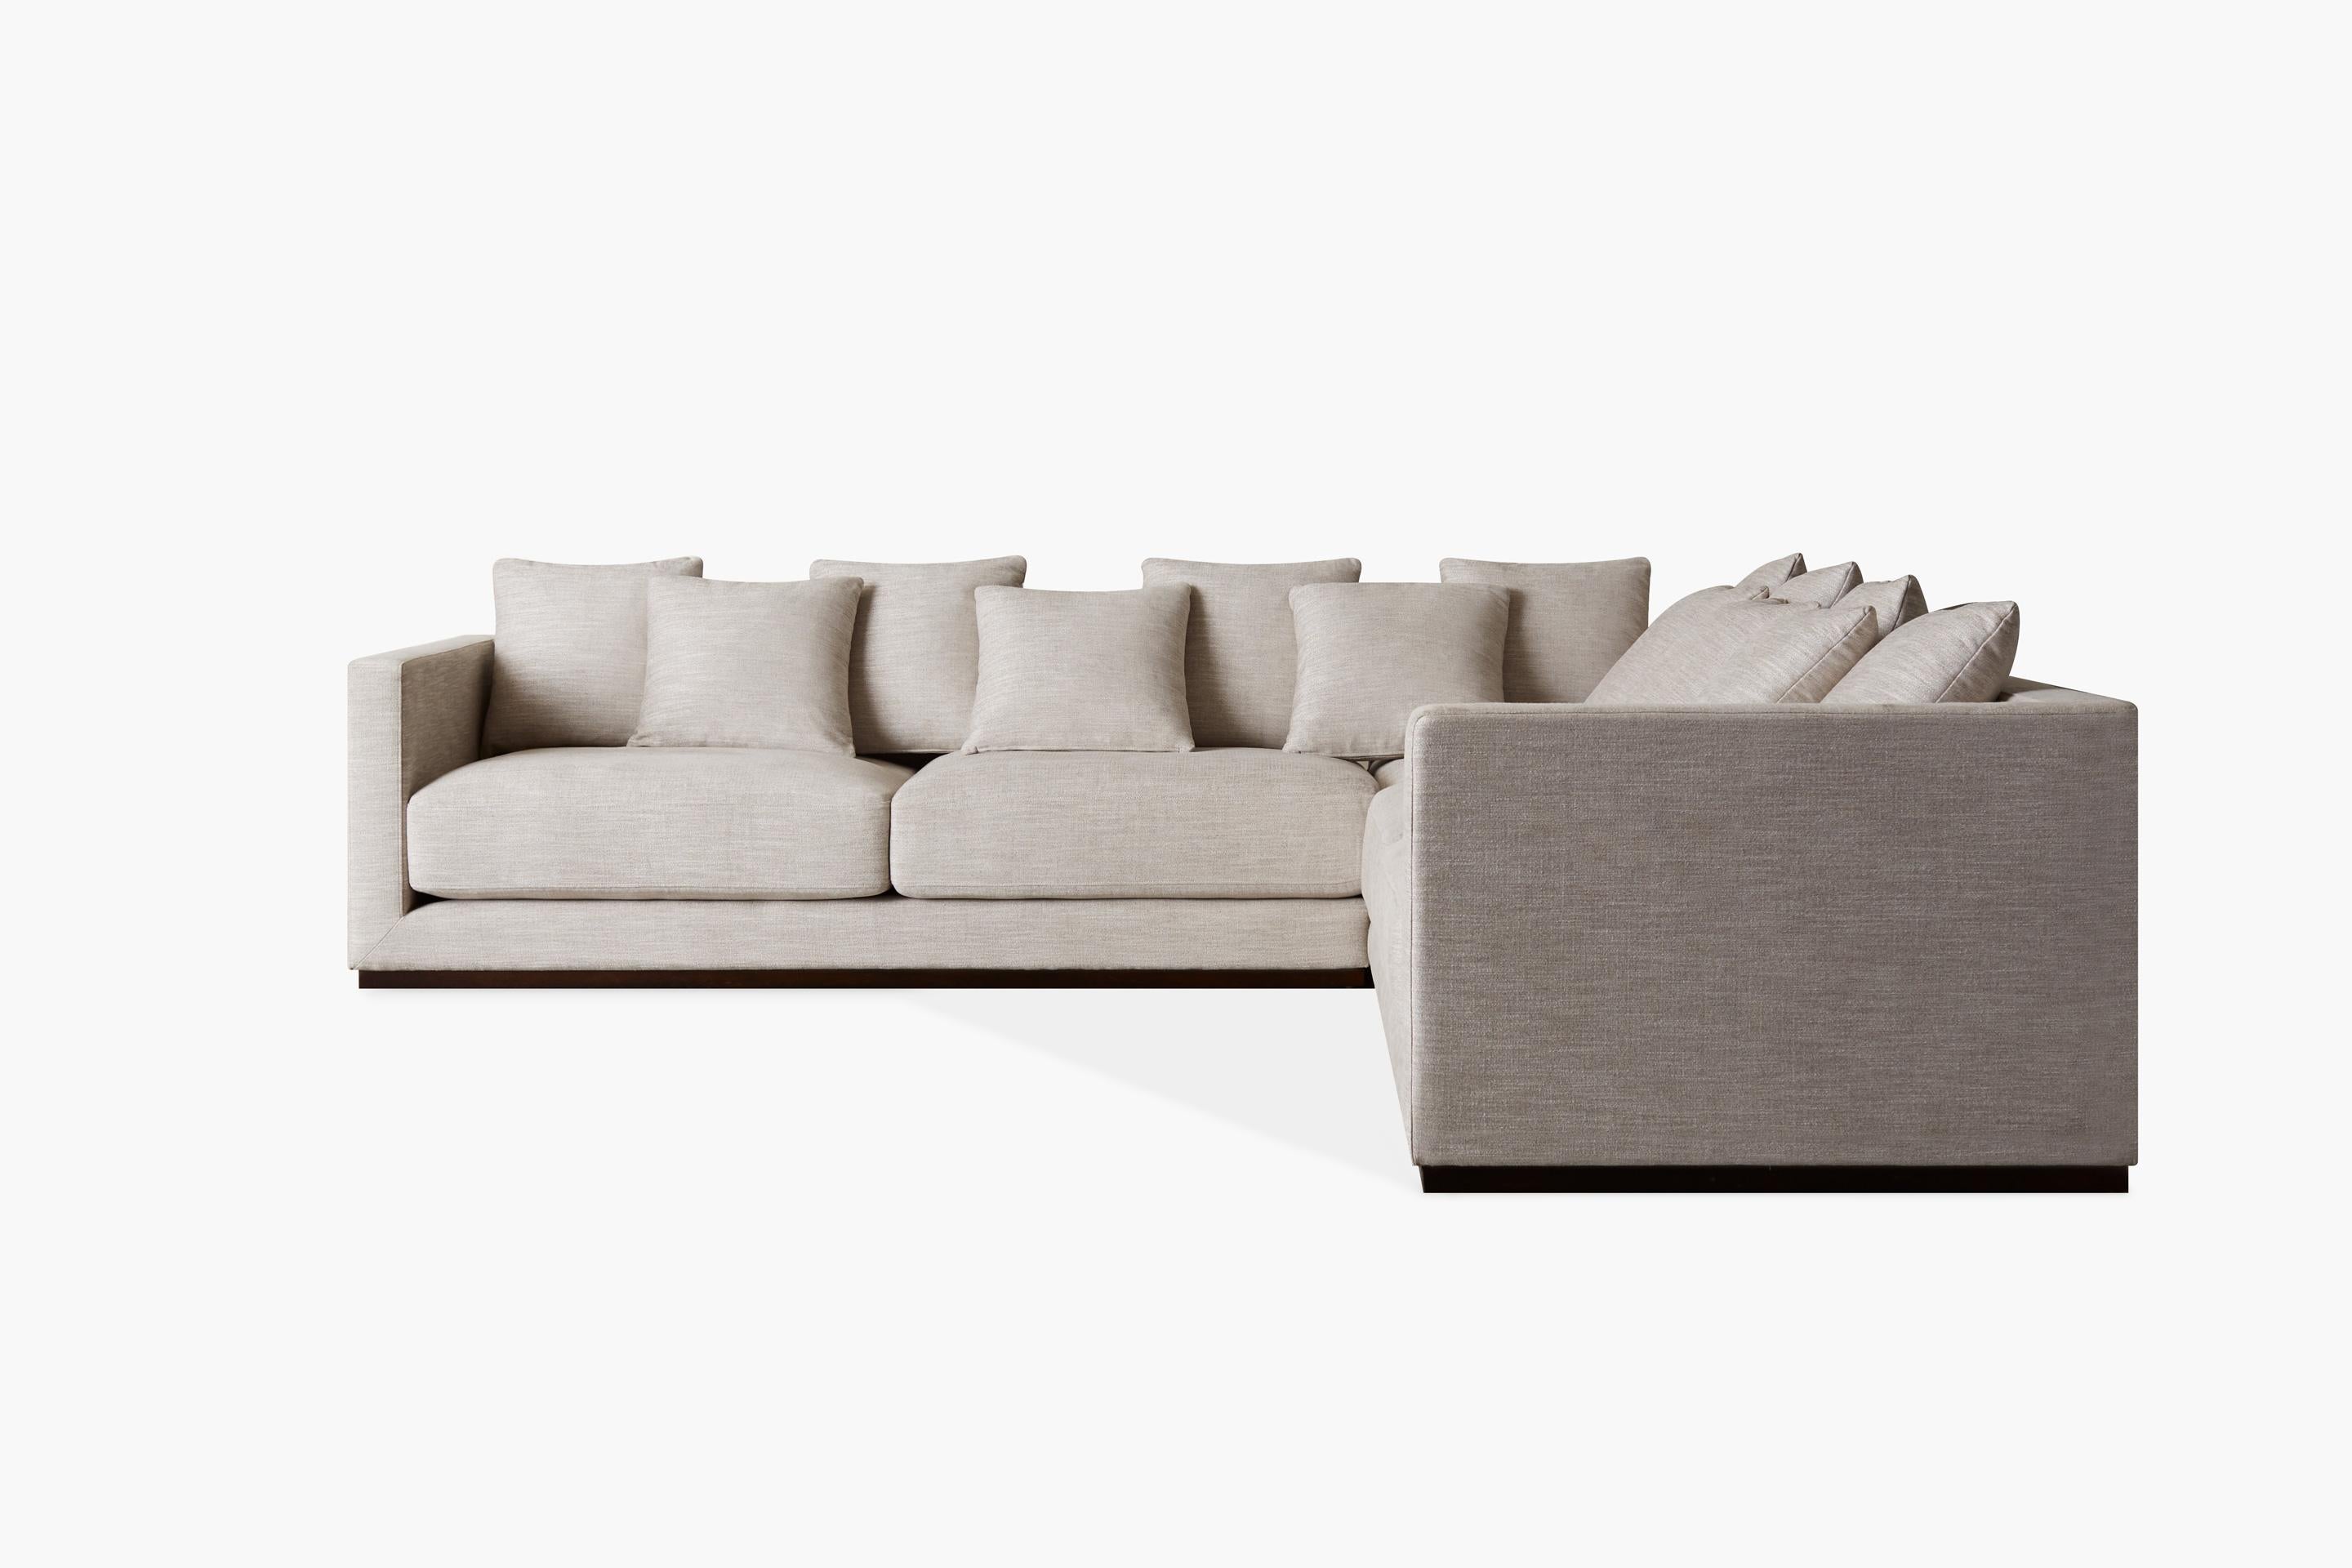 The ultimate in livable luxury, the Rowen sectional features expansive seat cushions to entice relaxation. The sophisticated low profile stature was carefully designed to provide a sectional with ample seating that won’t overwhelm a room.